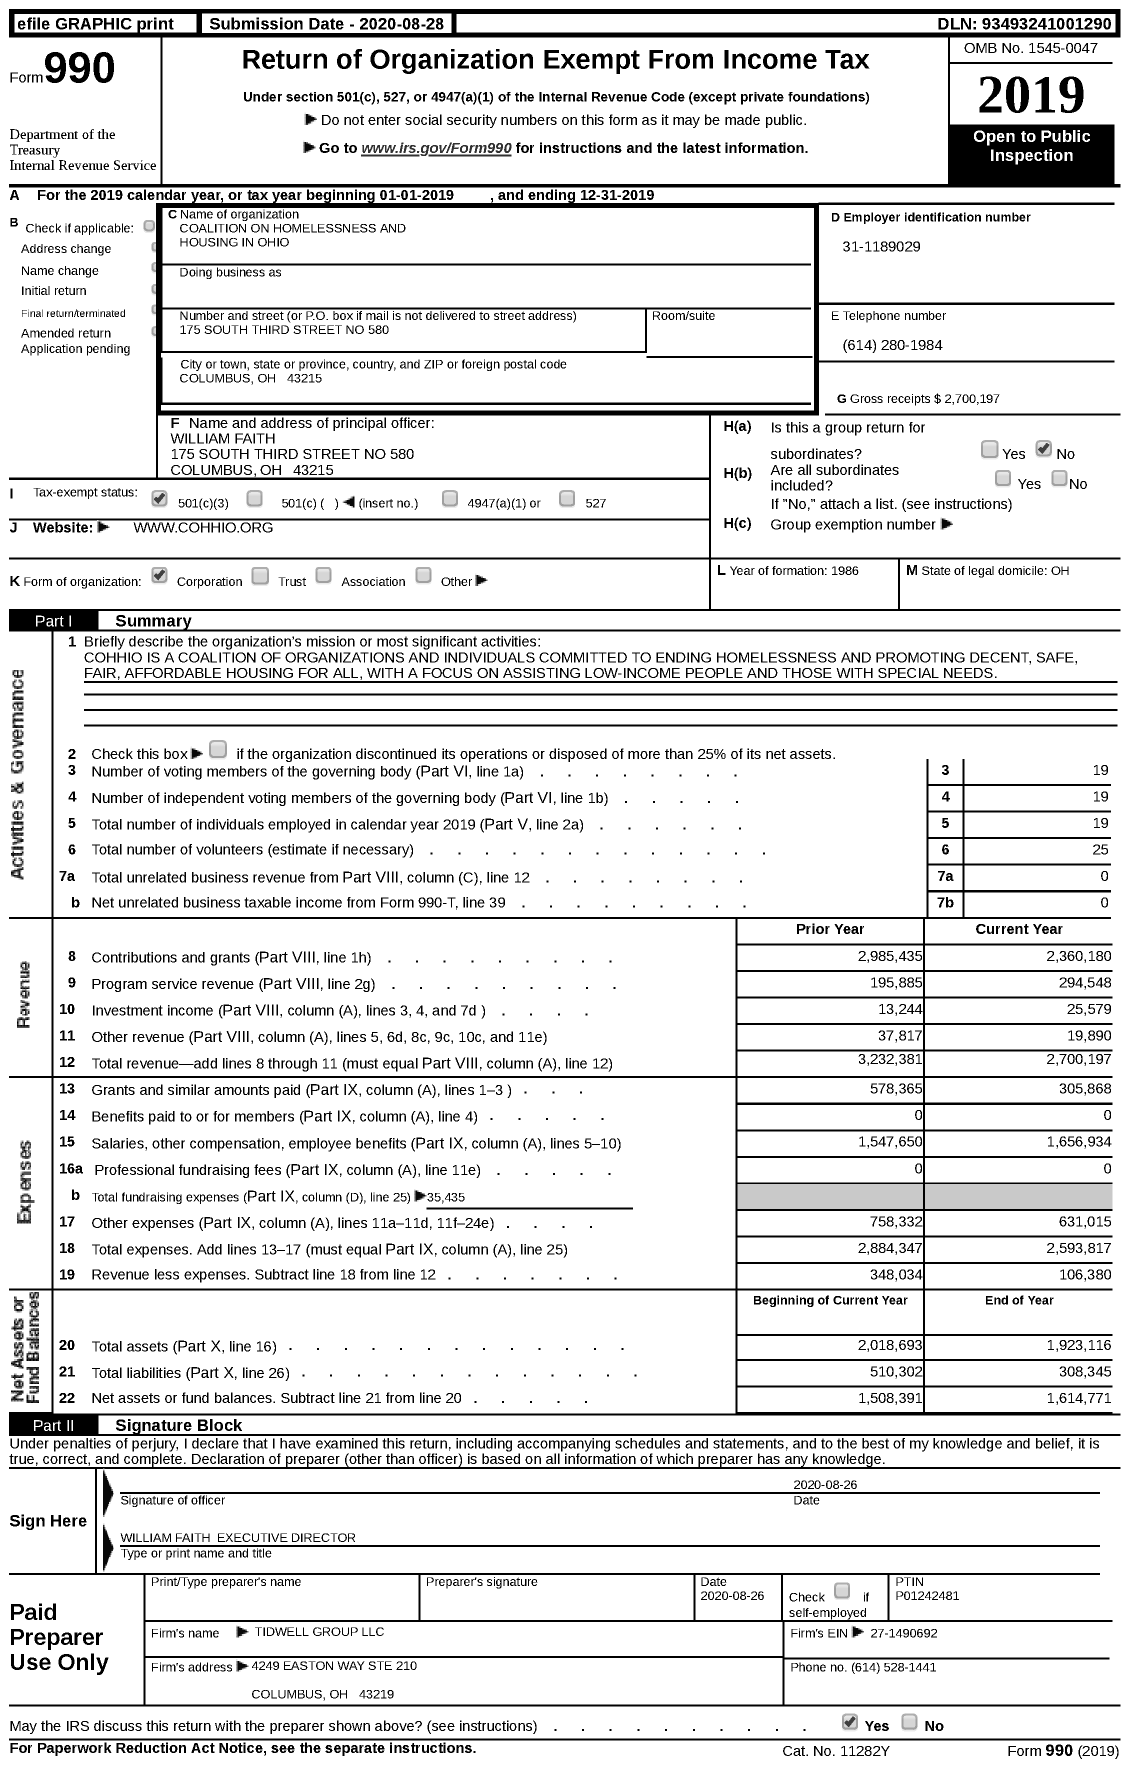 Image of first page of 2019 Form 990 for Coalition on Homelessness and Housing in Ohio